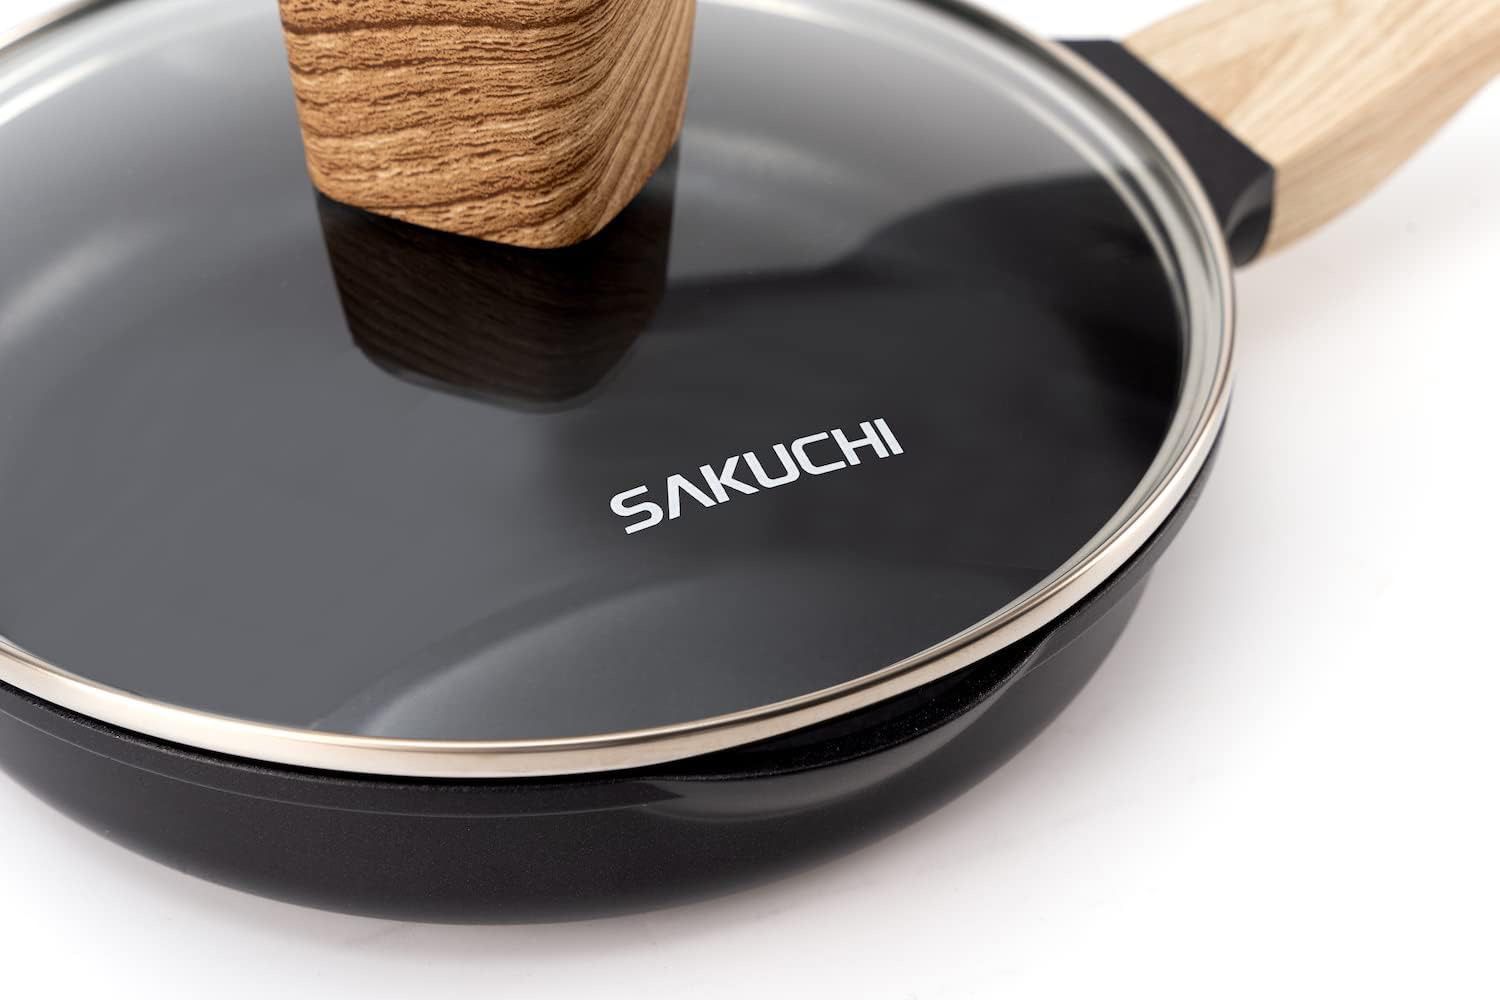  Sakuchi Black Non Stick Pots and Pans Set 8 Pcs Kitchen  Induction Cookware Sets, Dishwasher Safe, Saute Pan/Frying Pan/Saucepan  with Cool-touch Handles, Toxin Free Child Safety.: Home & Kitchen